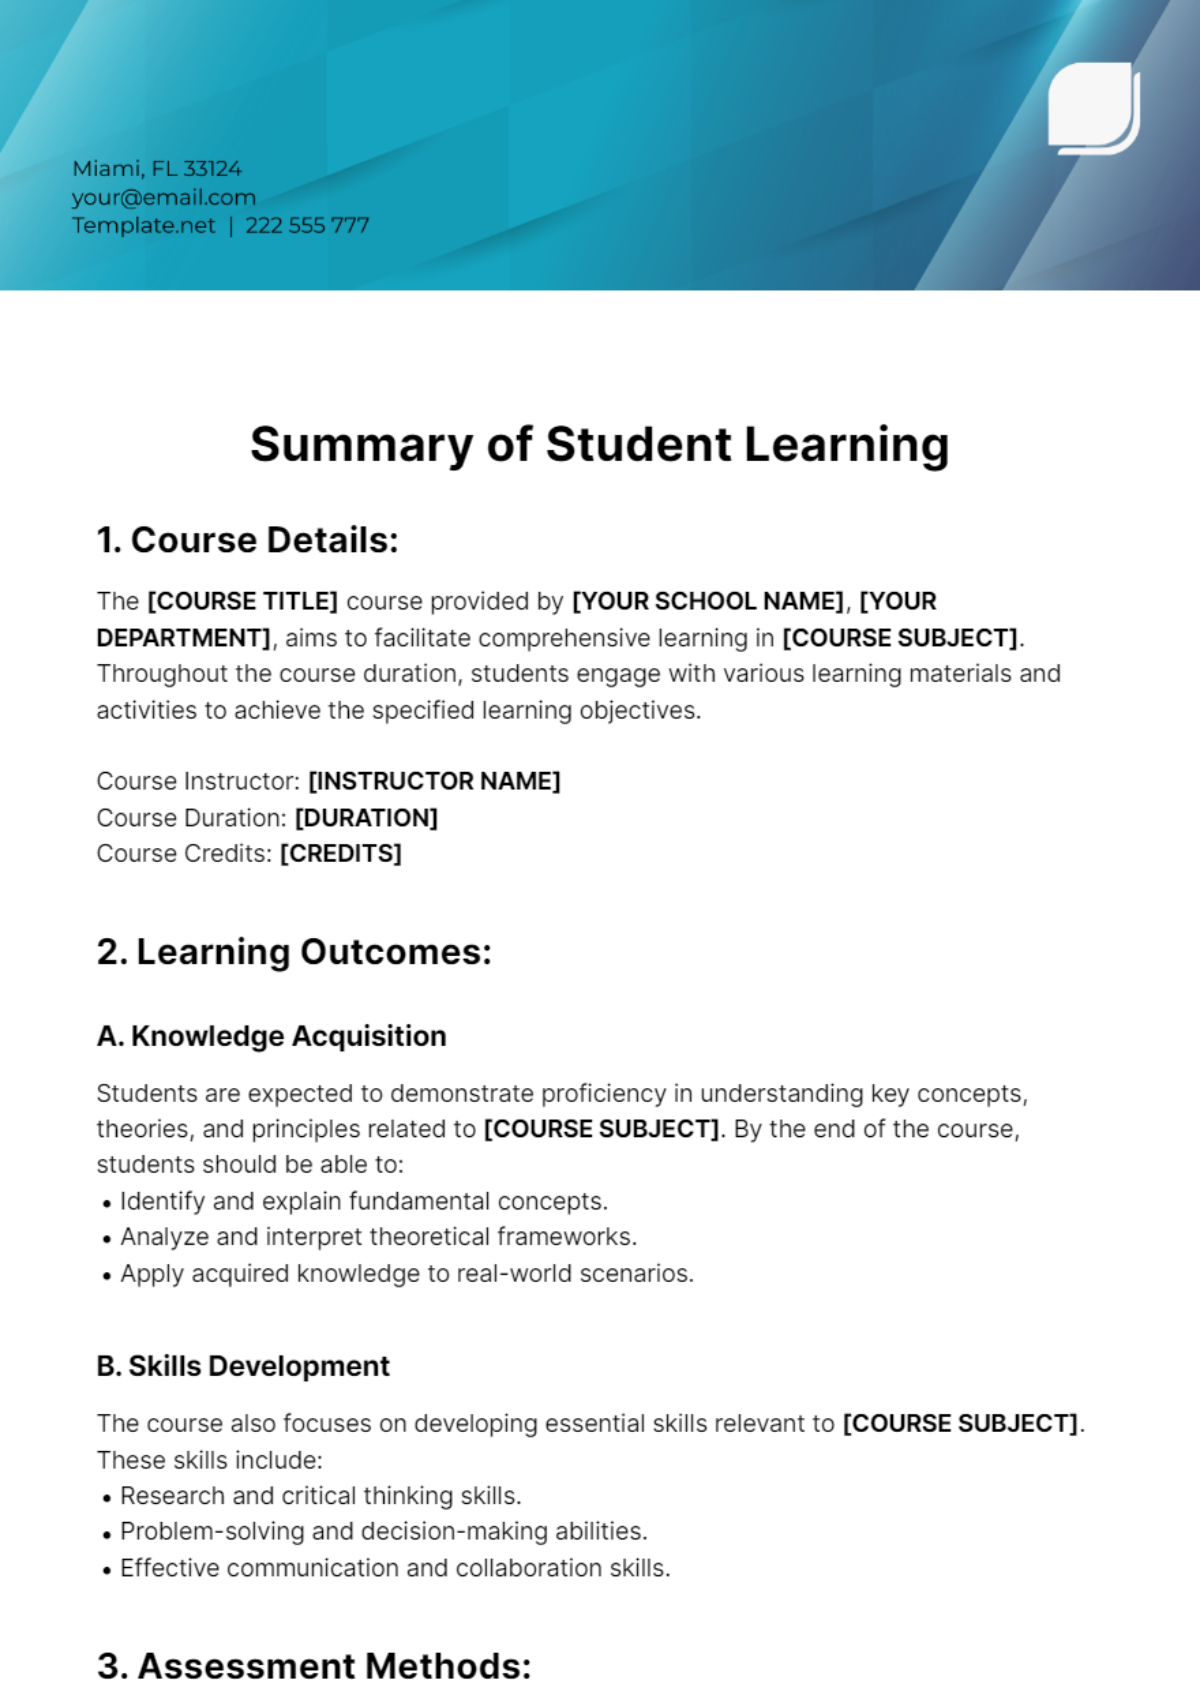 Summary of Student Learning Template